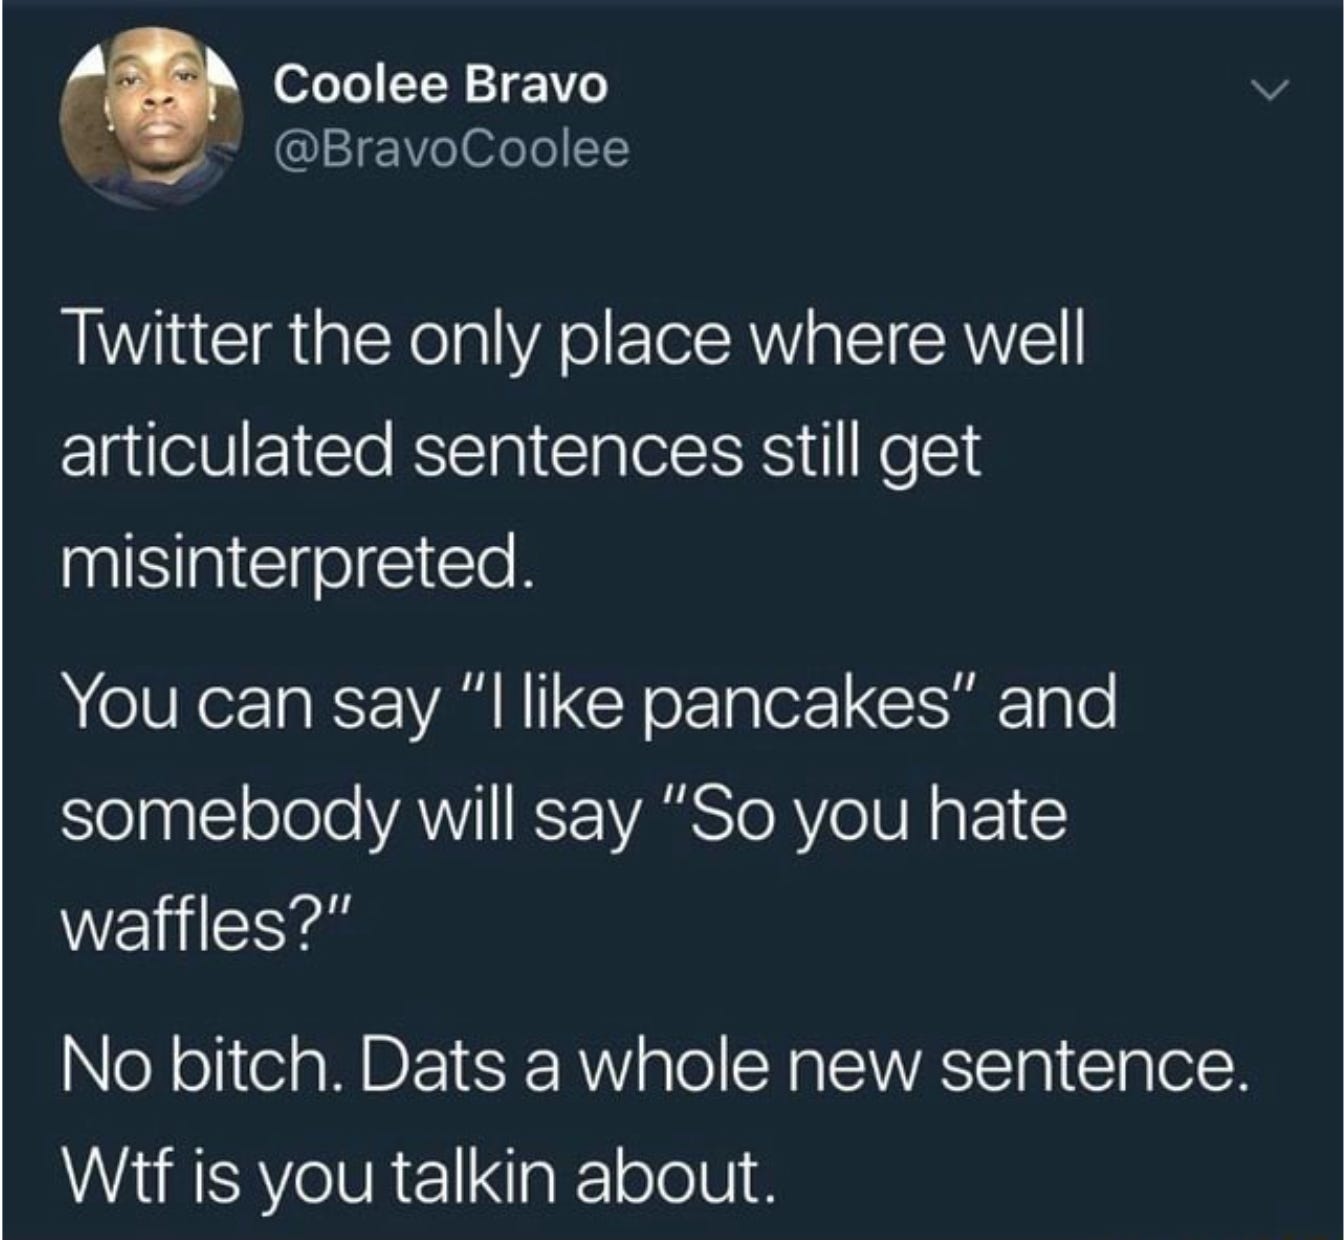 a tweet from @BravoCoolee that reads: Twitter the only place where well articulated sentences still get misinterpreted. You can say “I like pancakes” and somebody will say “So you hate waffles?” No bitch. Dats a whole new sentence. Wtf is you talkin about.